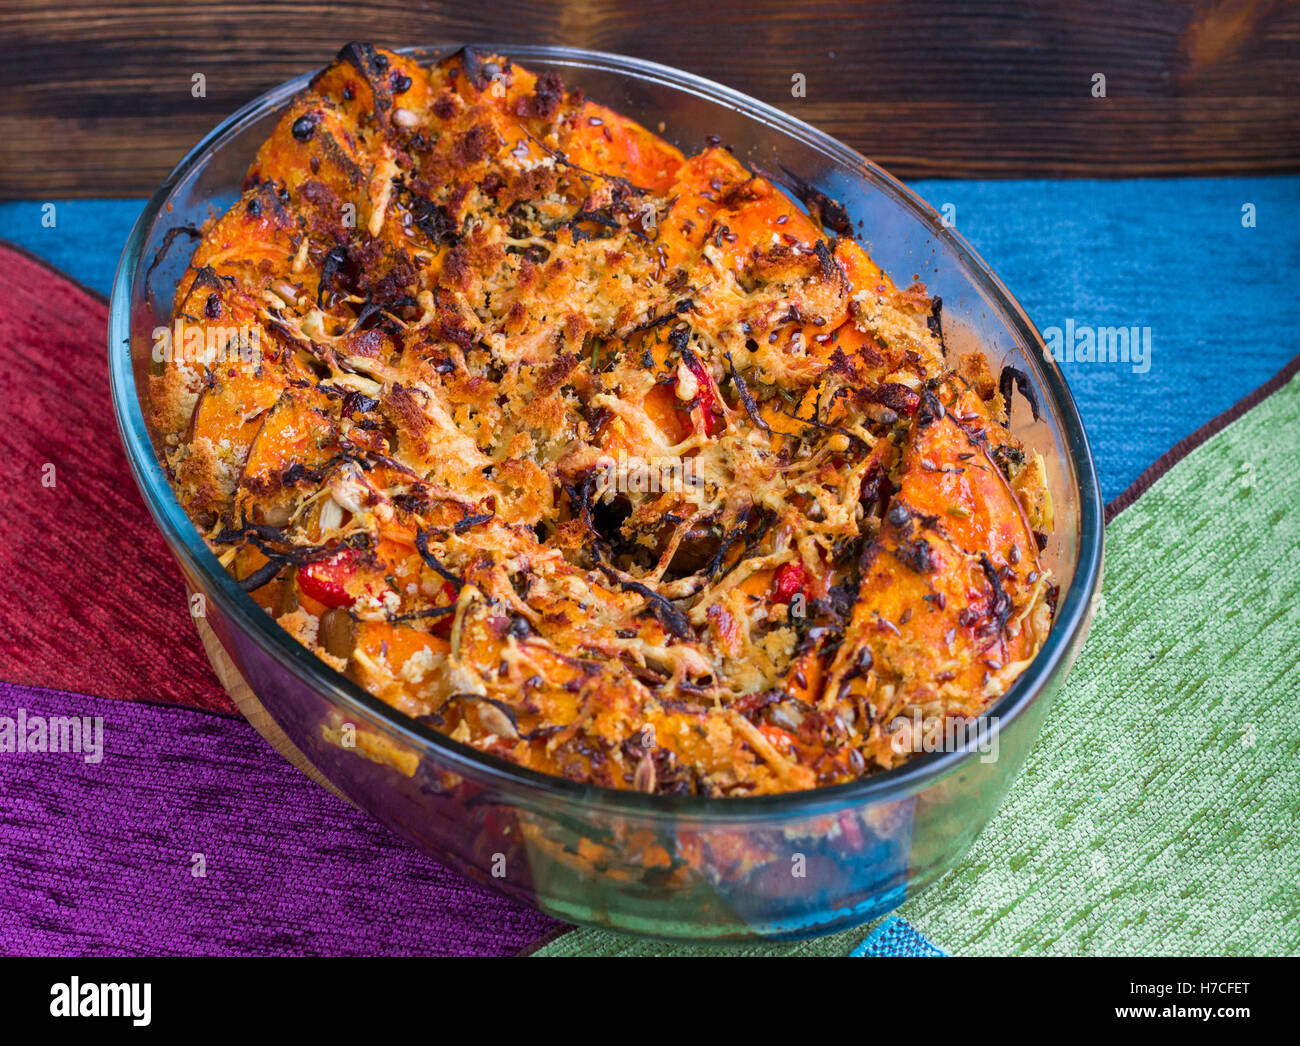 Vegetarian dish of orange pumkin, mixed vegetables, herbs and cheese baked in oven Stock Photo